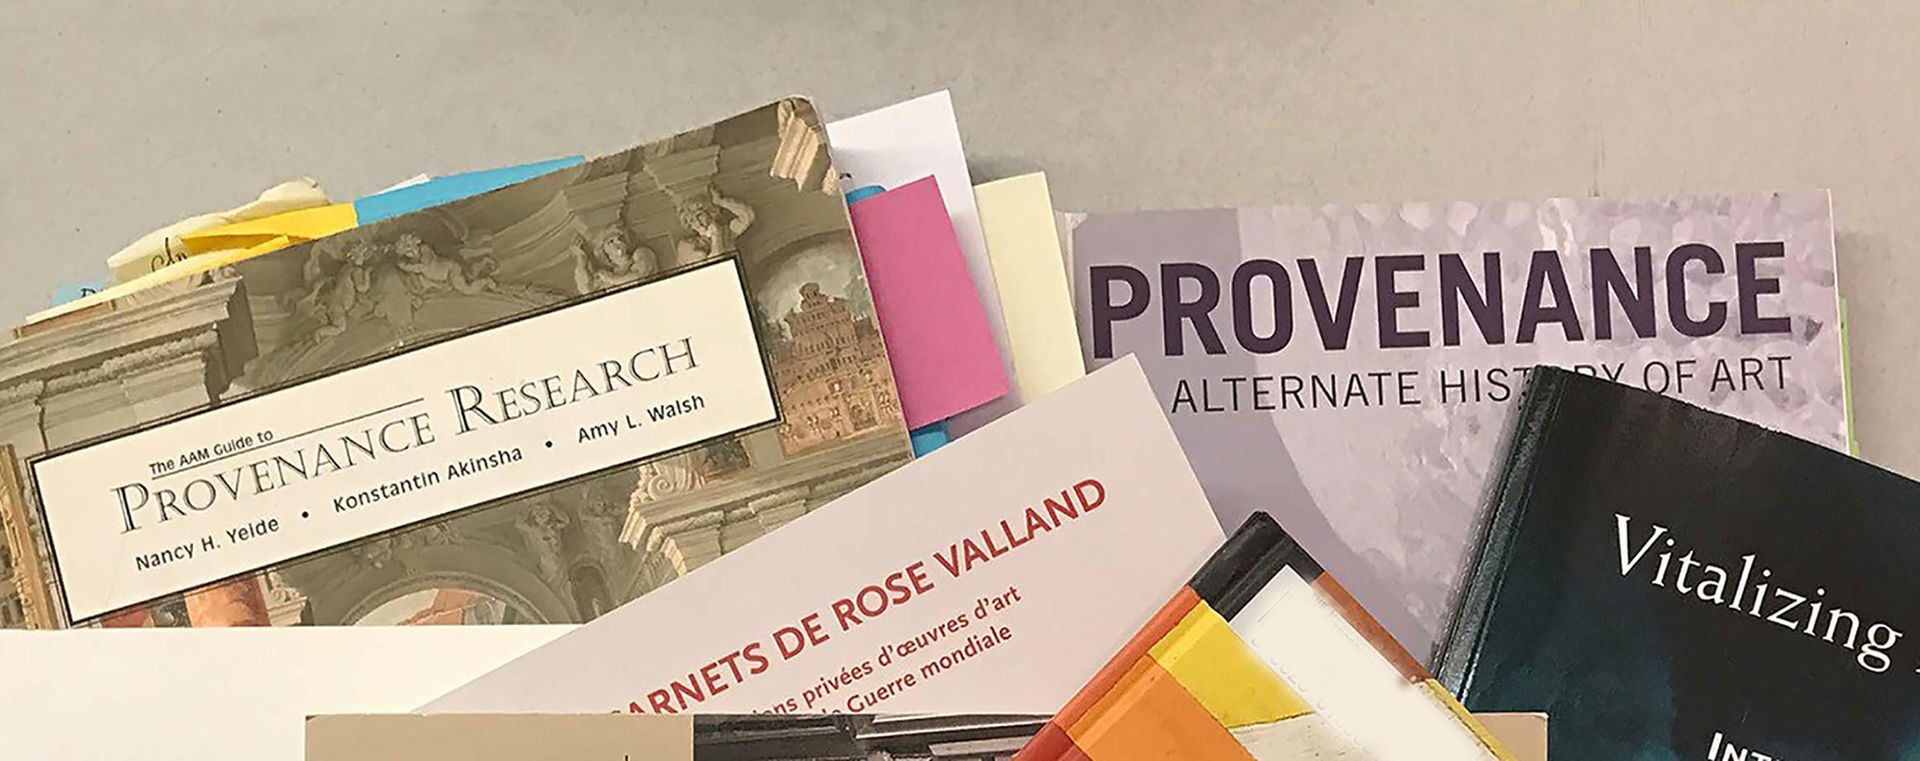 Color photograph of provenance research book covers.